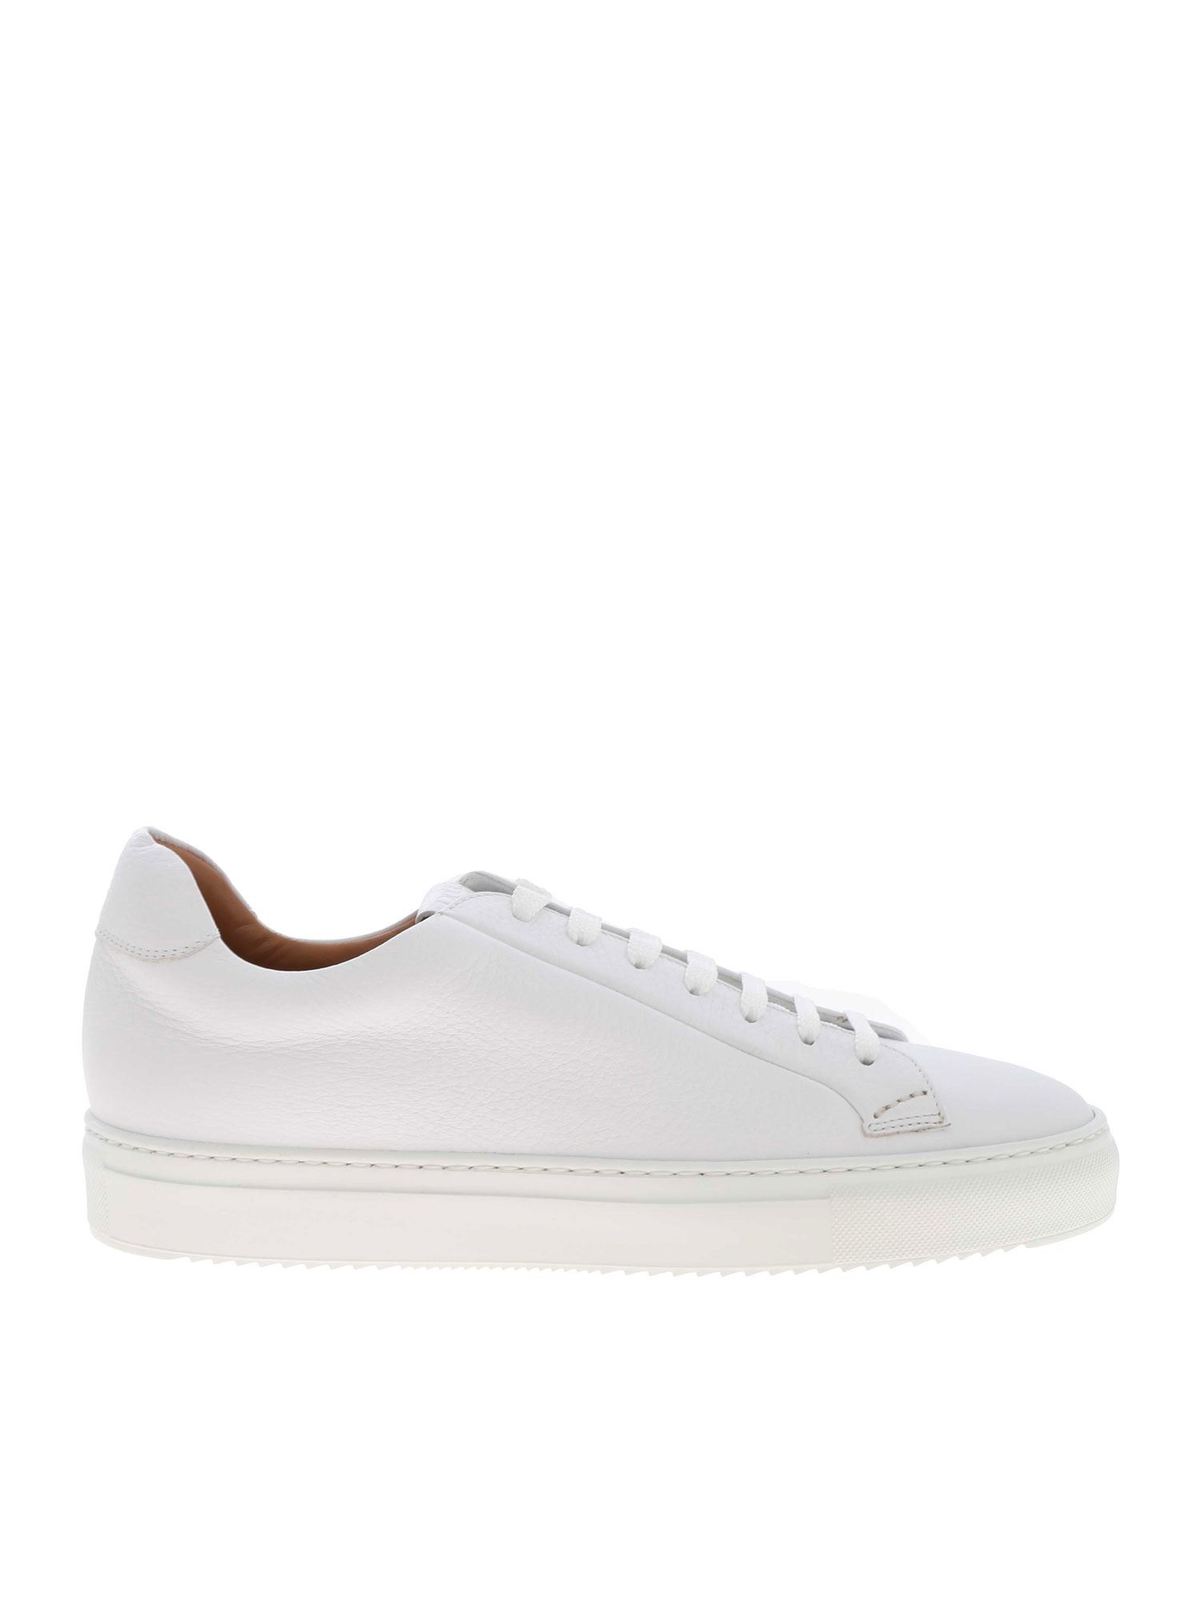 Doucal's - Logo leather sneakers in white - trainers - DU1796ERICUF019IW00